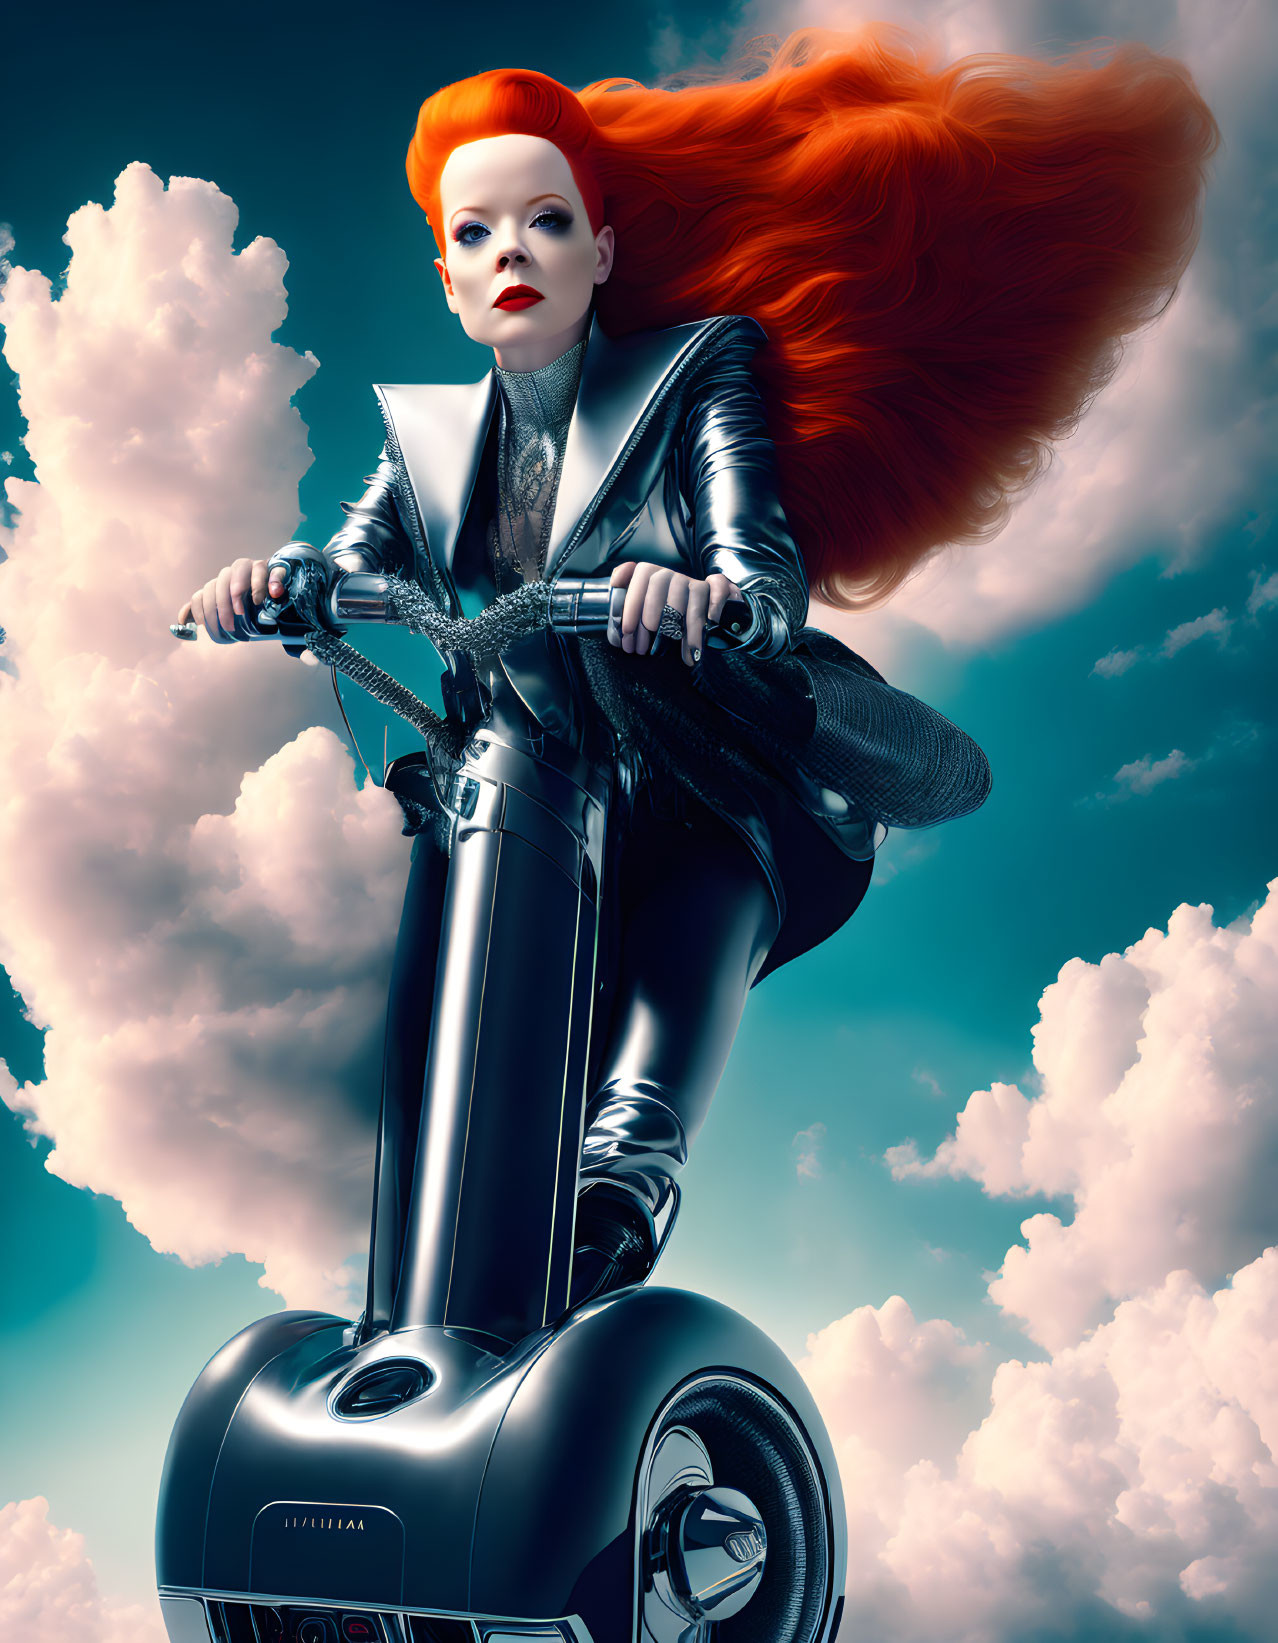 Vibrant red-haired woman in silver outfit on black Segway under blue sky